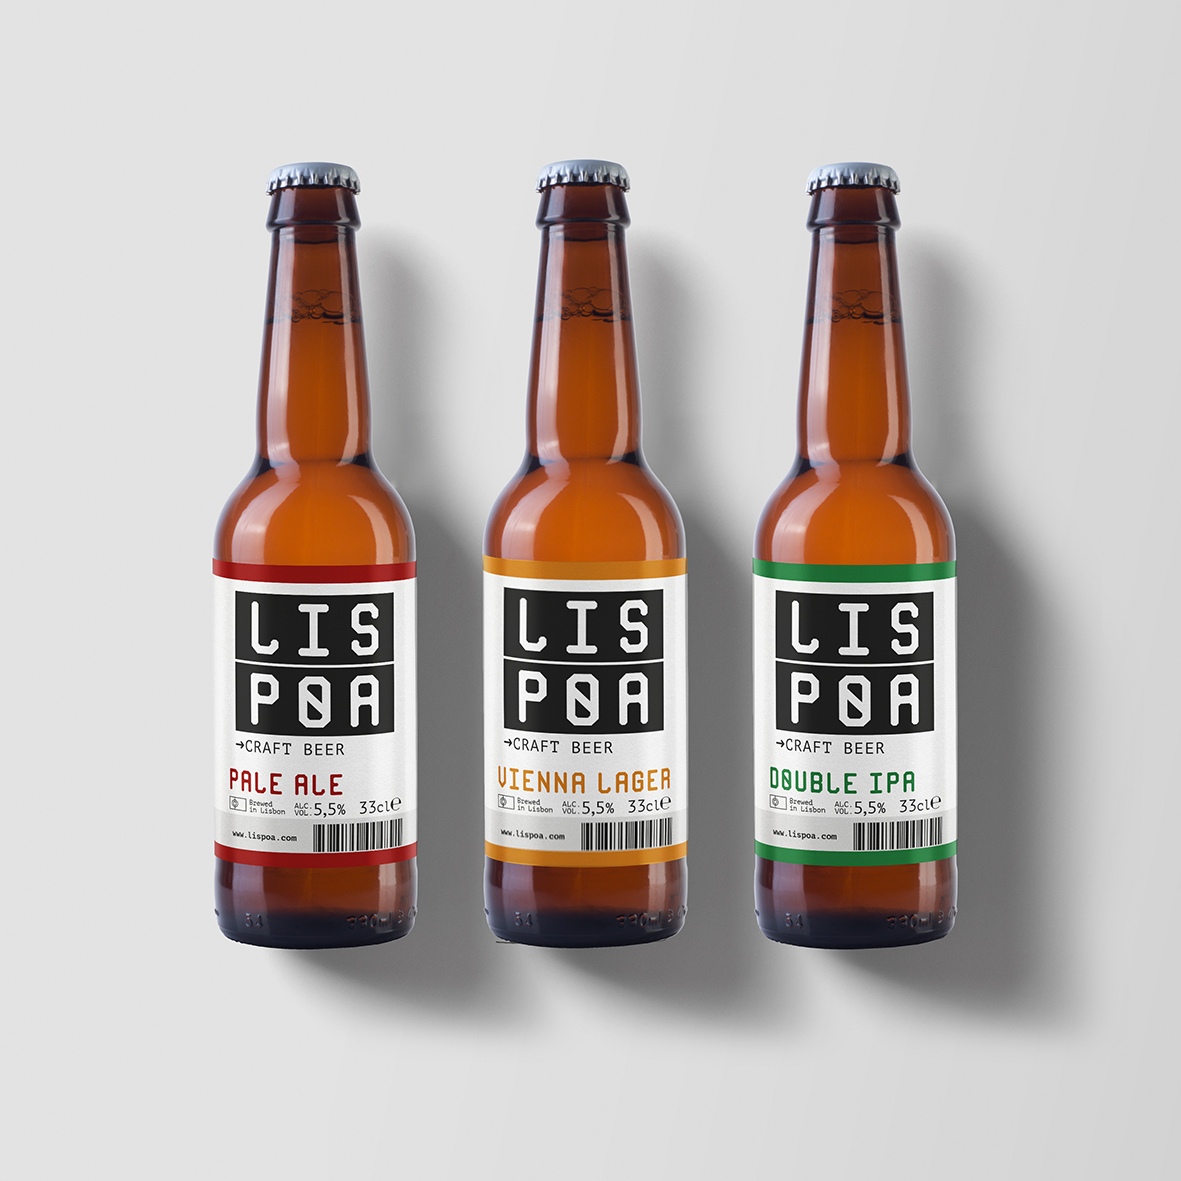 Brand Identity and Packaging Design for Craft Beer From Portugal